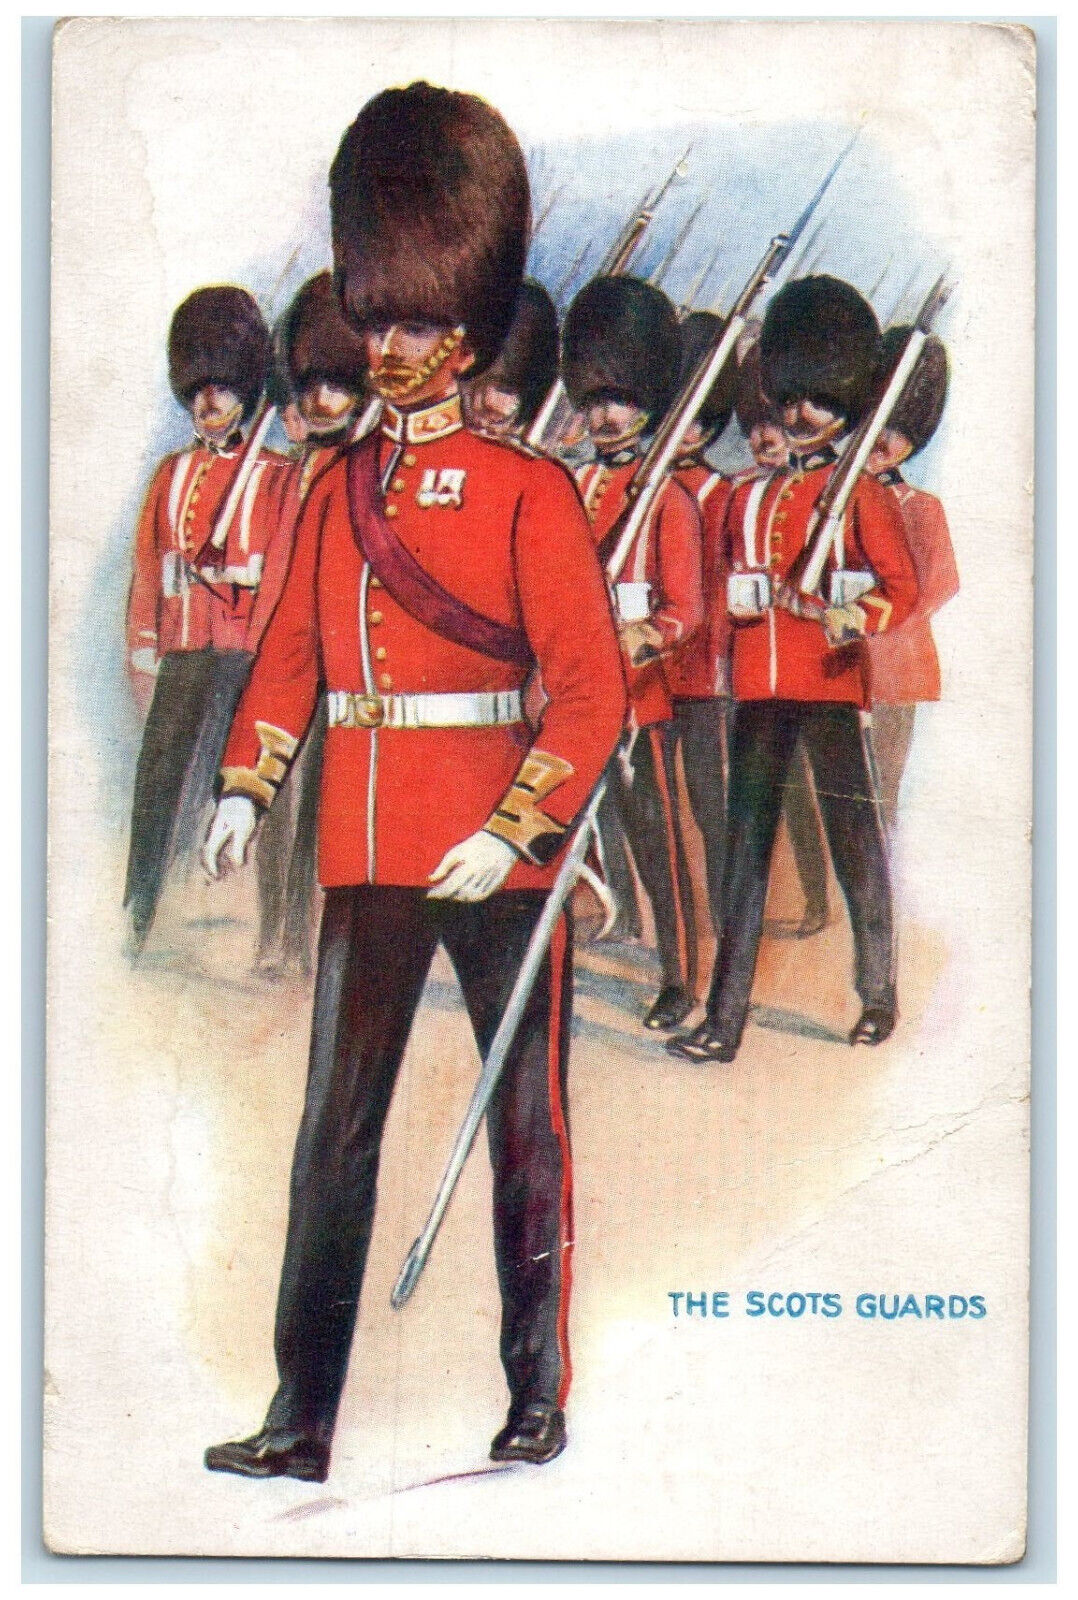 1919 The Scots Guards Marching Waldeck Saskatchewan Canada Posted Postcard